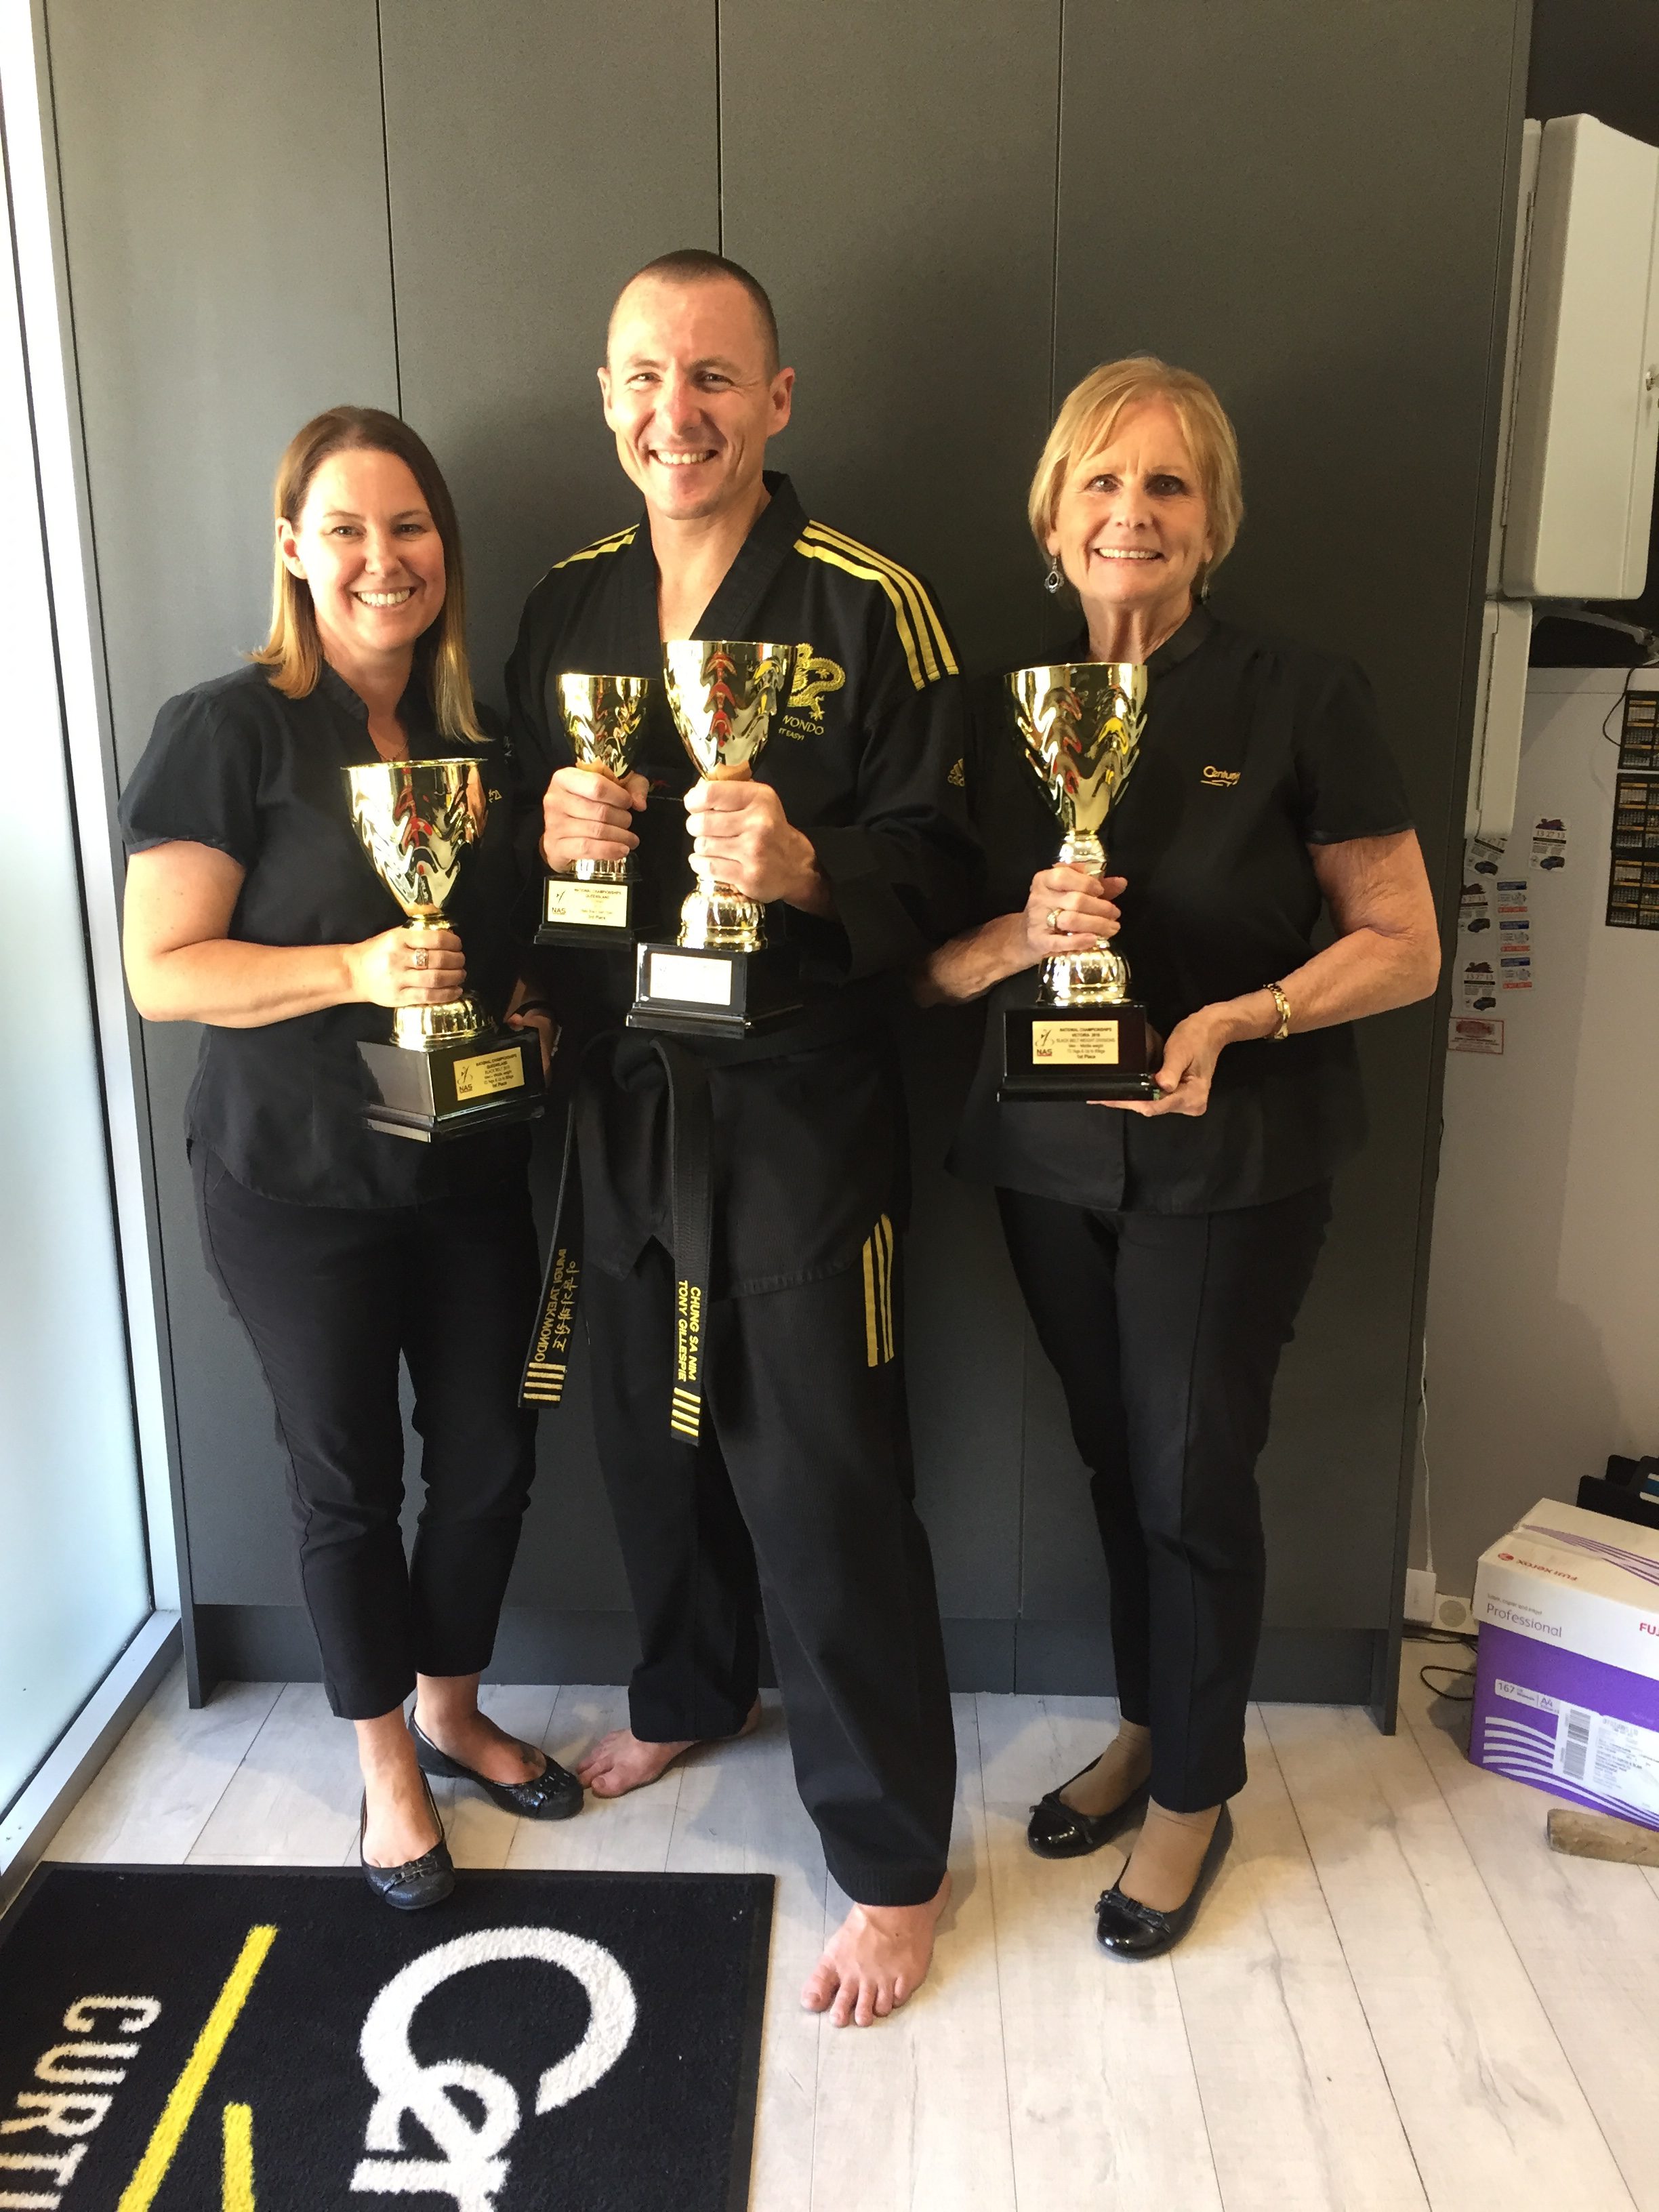 Jane Curtis, Tony Gillespie and Kerry O'Donnell (Century 21 Curtis & Blair - Major Sponsor of Imugi TKD).